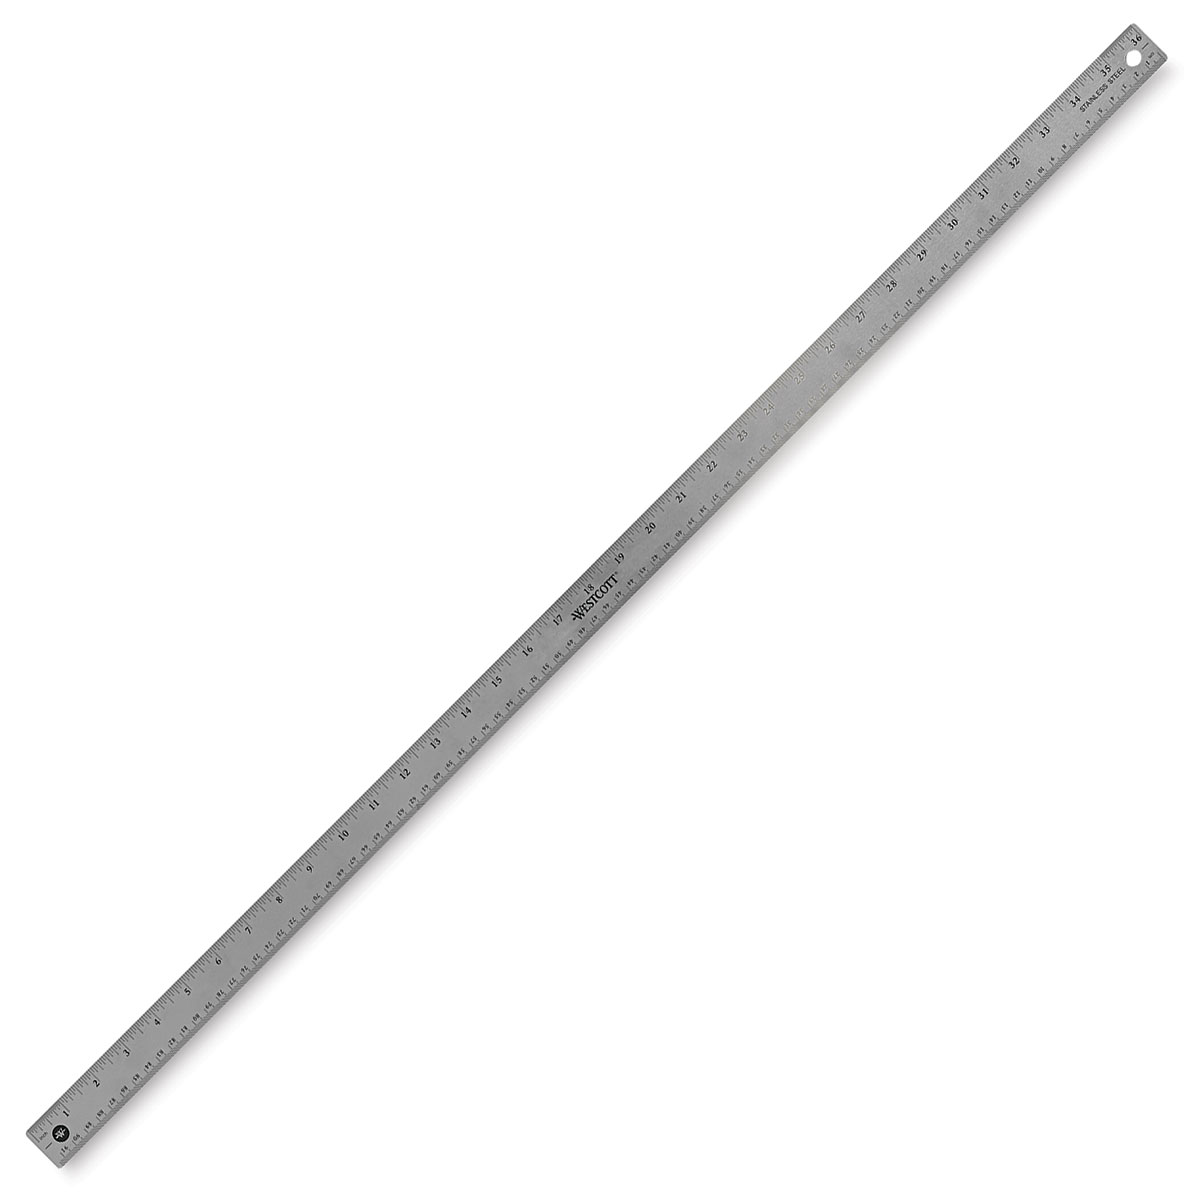 12 In. Stainless Steel Ruler